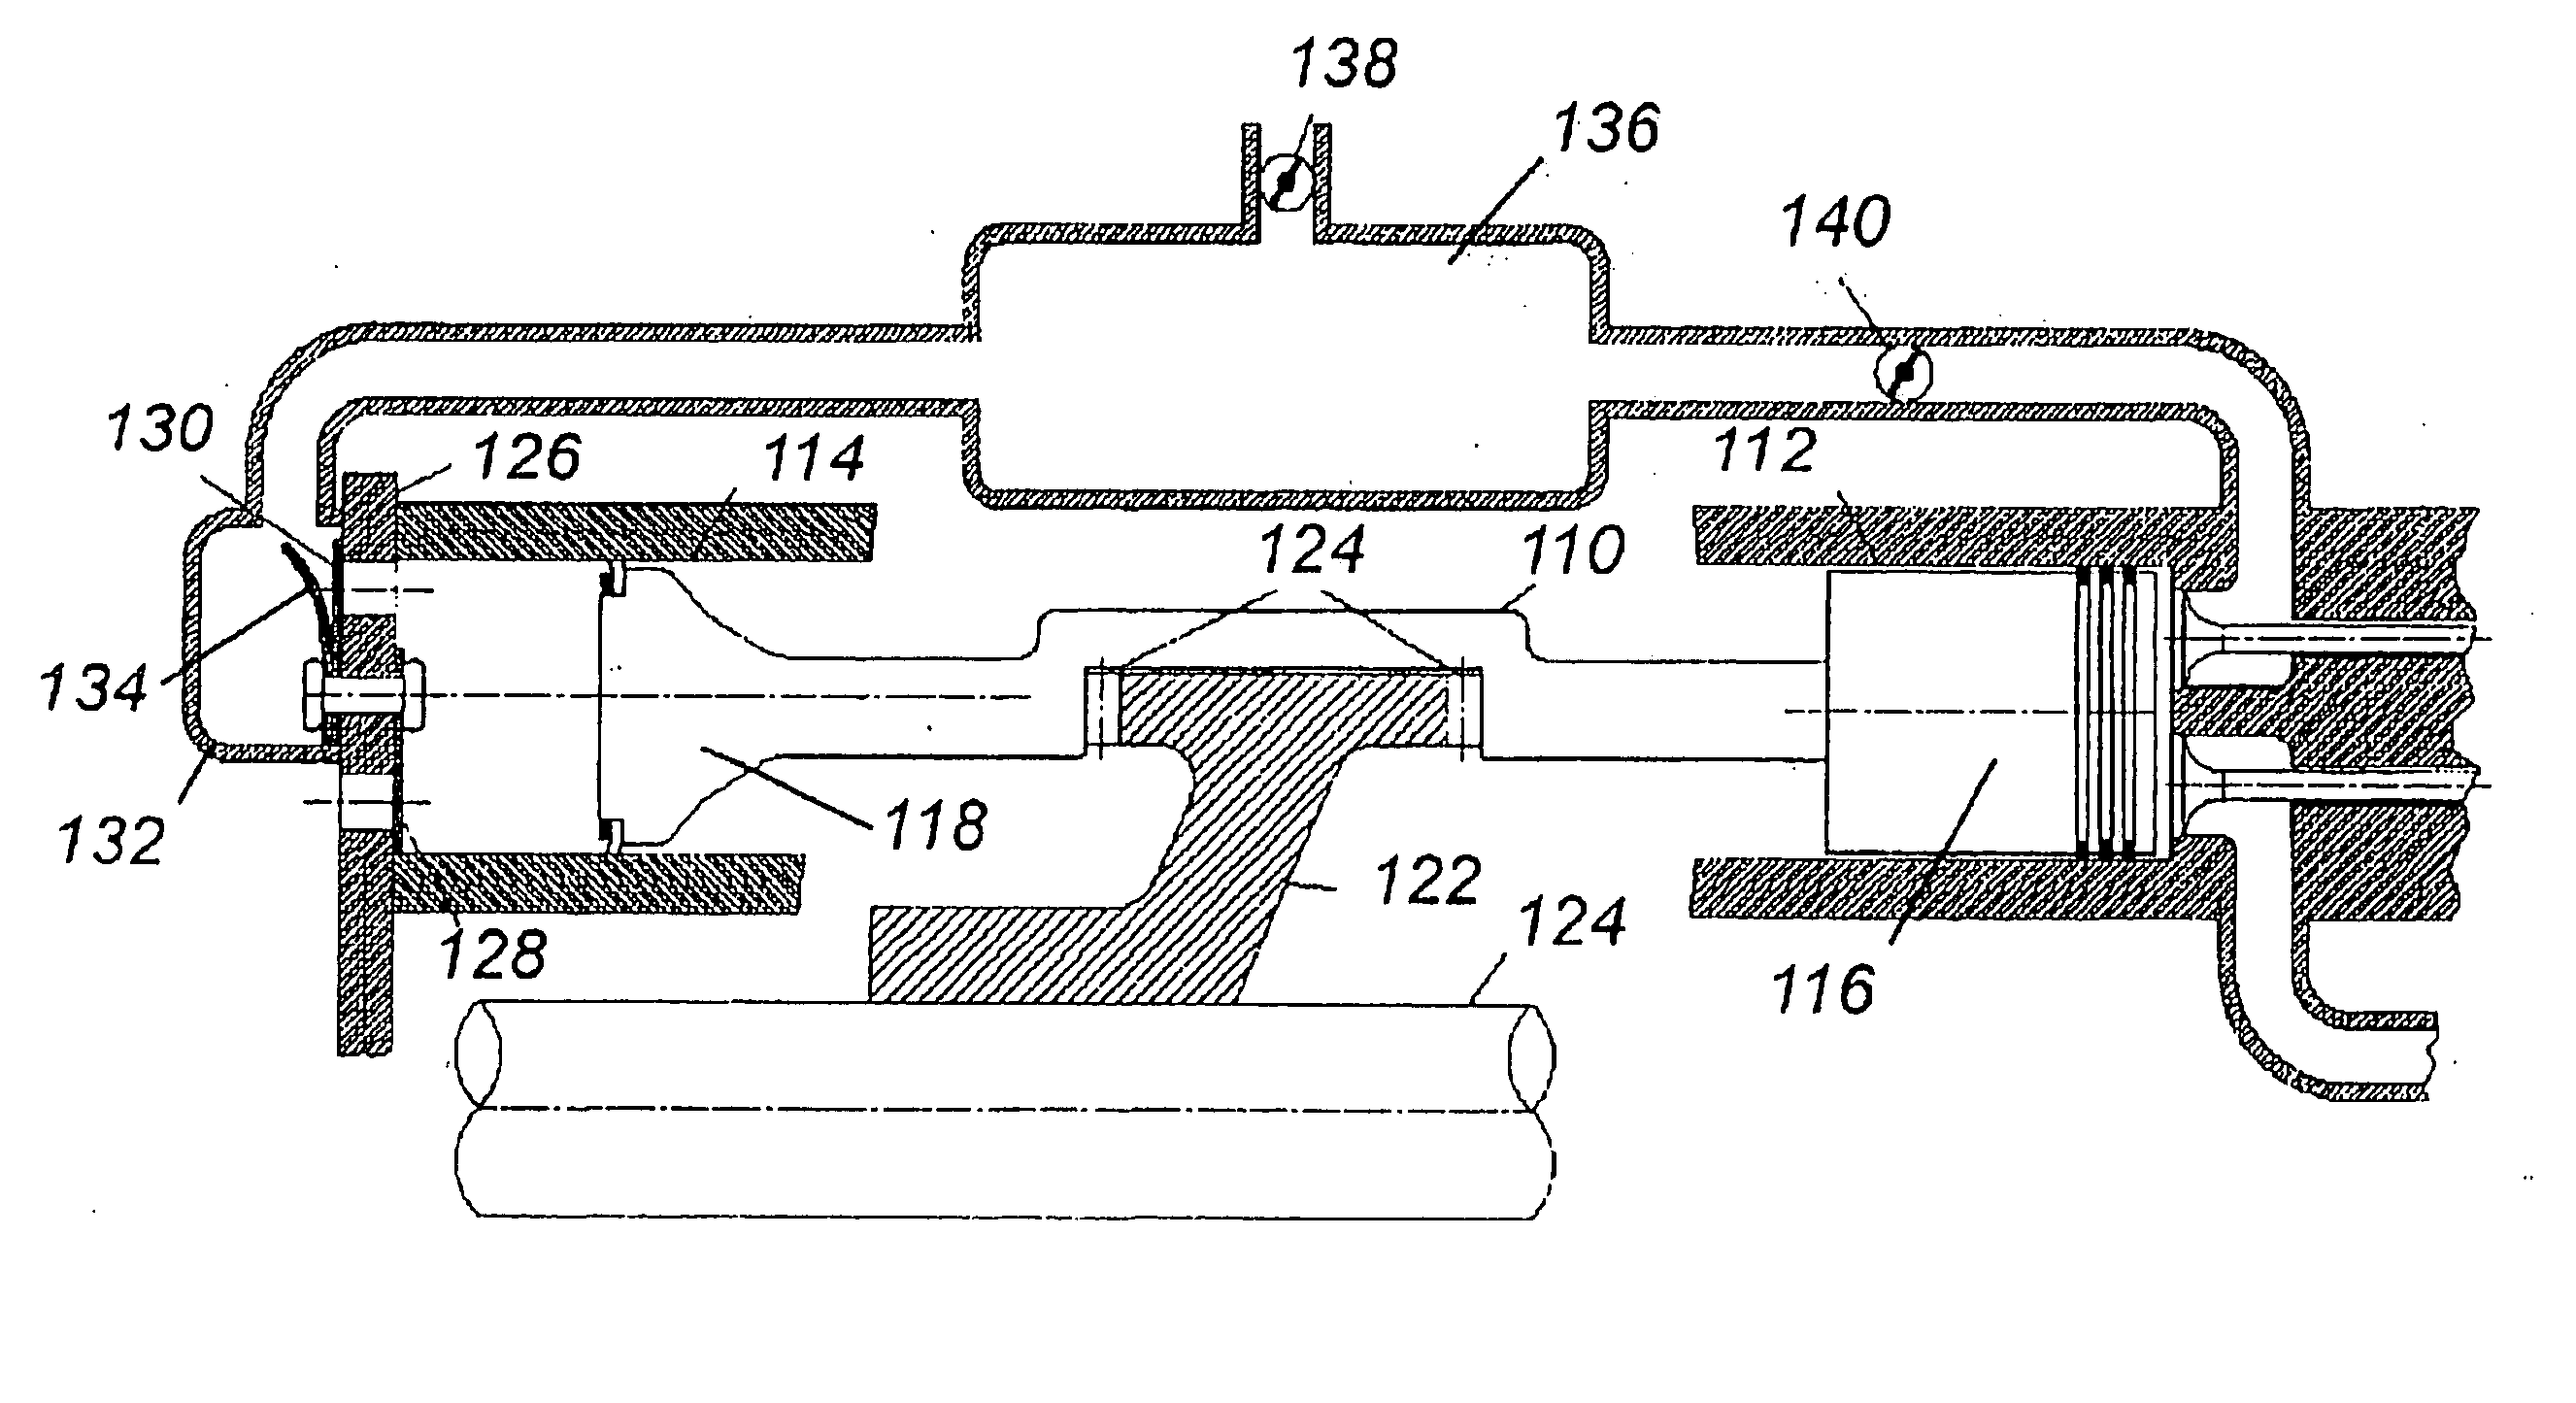 Single-ended barrel engine with double-ended, double roller pistons